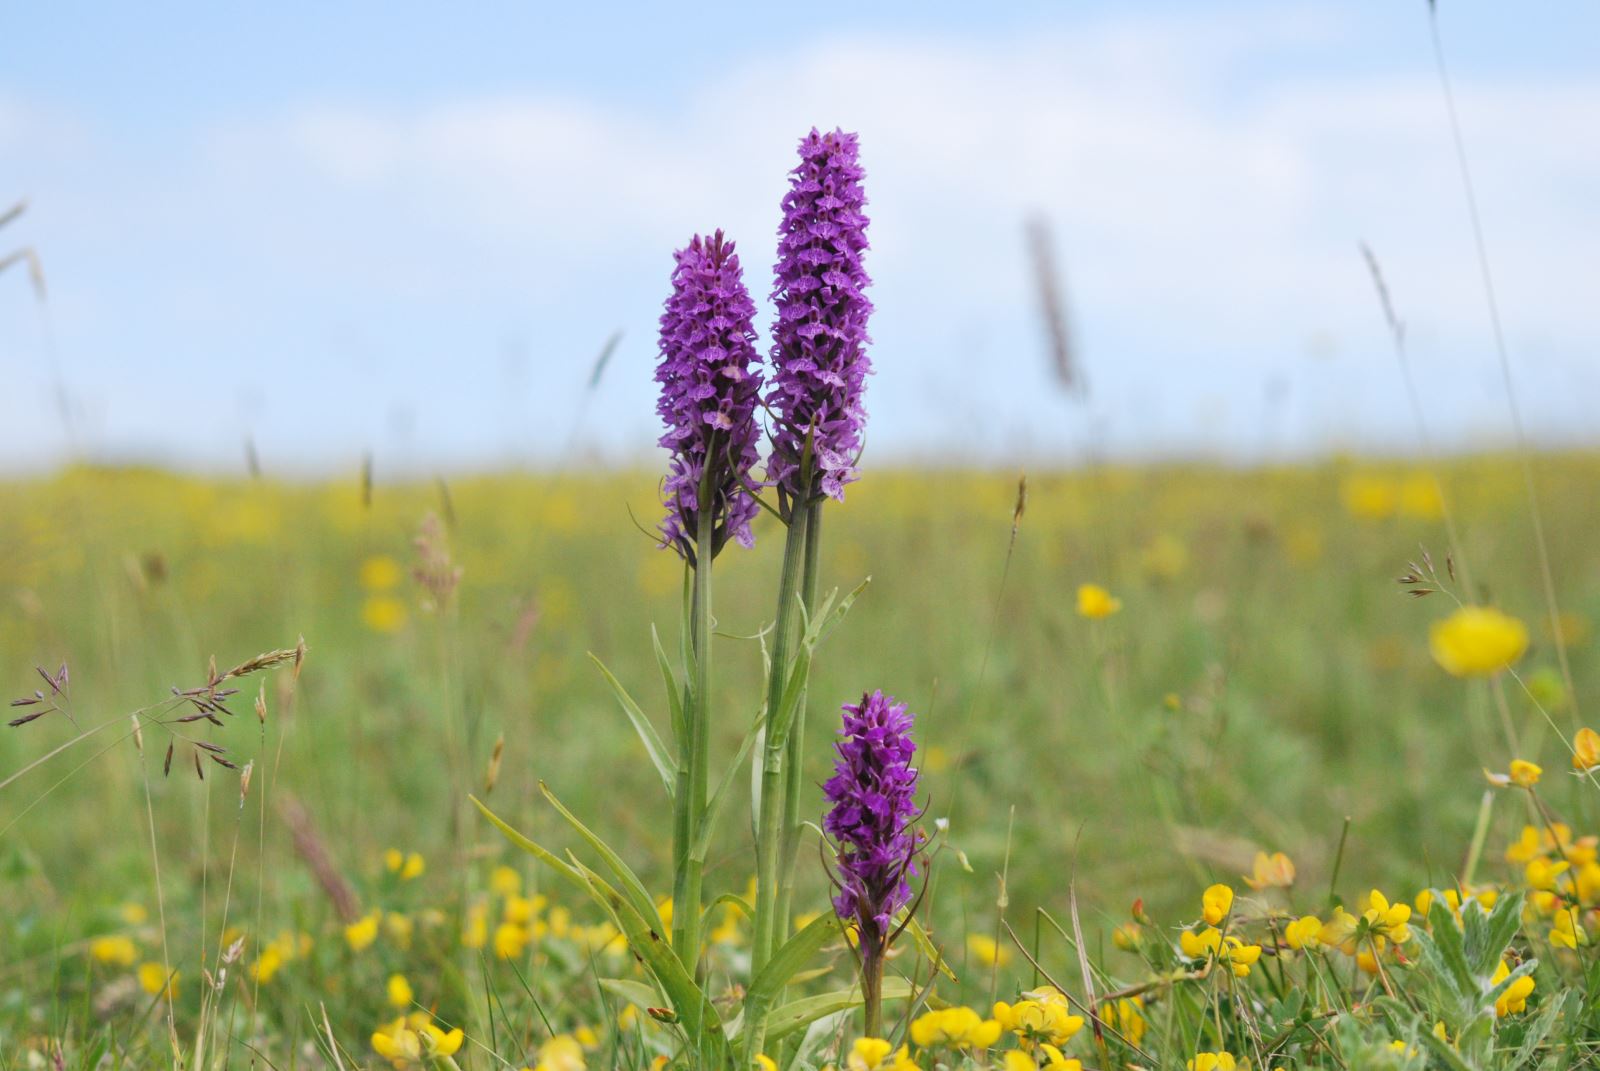 Southern Marsh Orchid in field